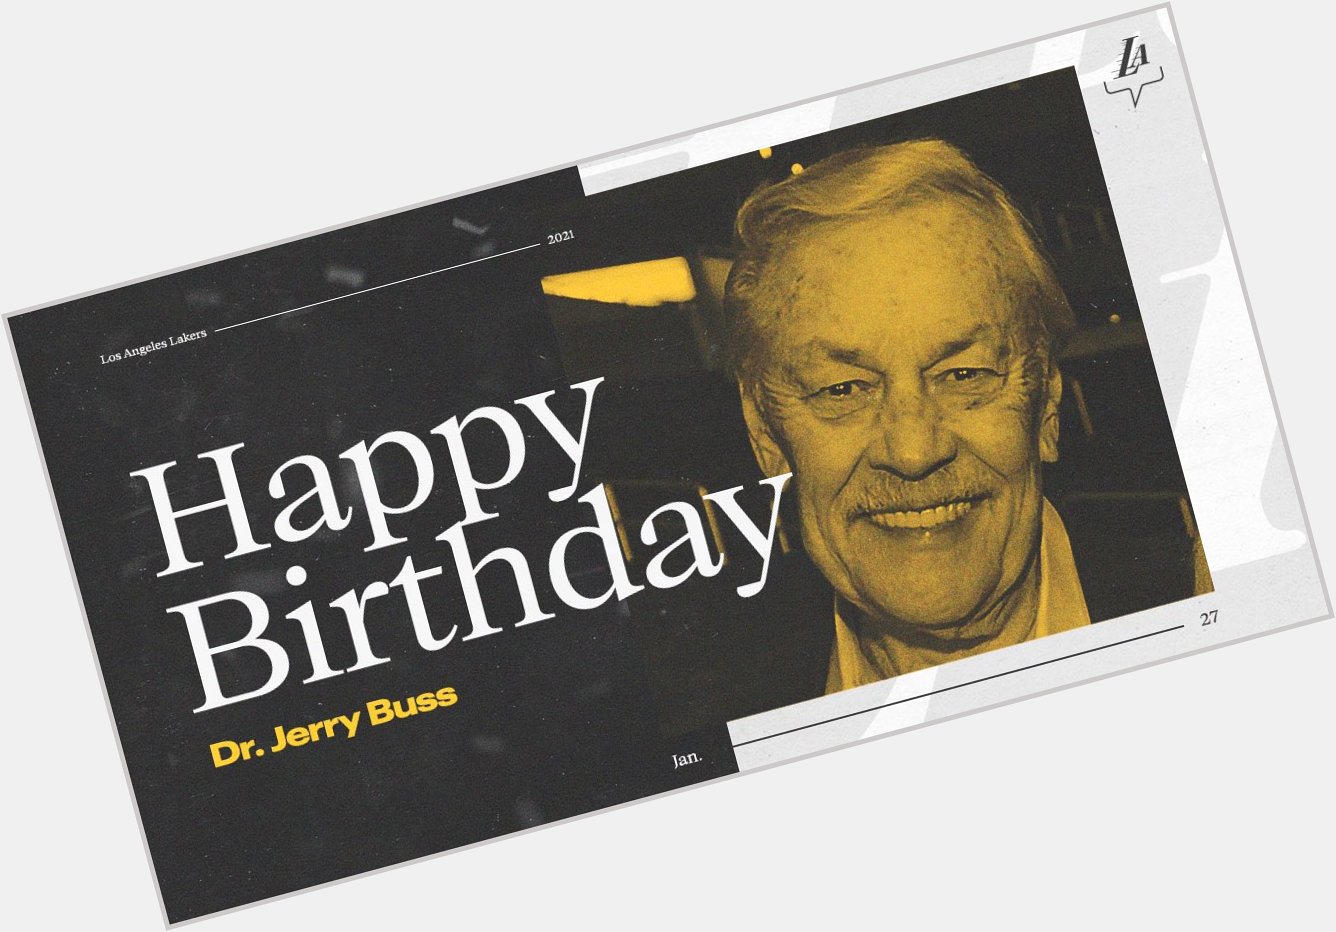 A visionary that always made the impossible, possible: Happy birthday to the great Dr. Jerry Buss  